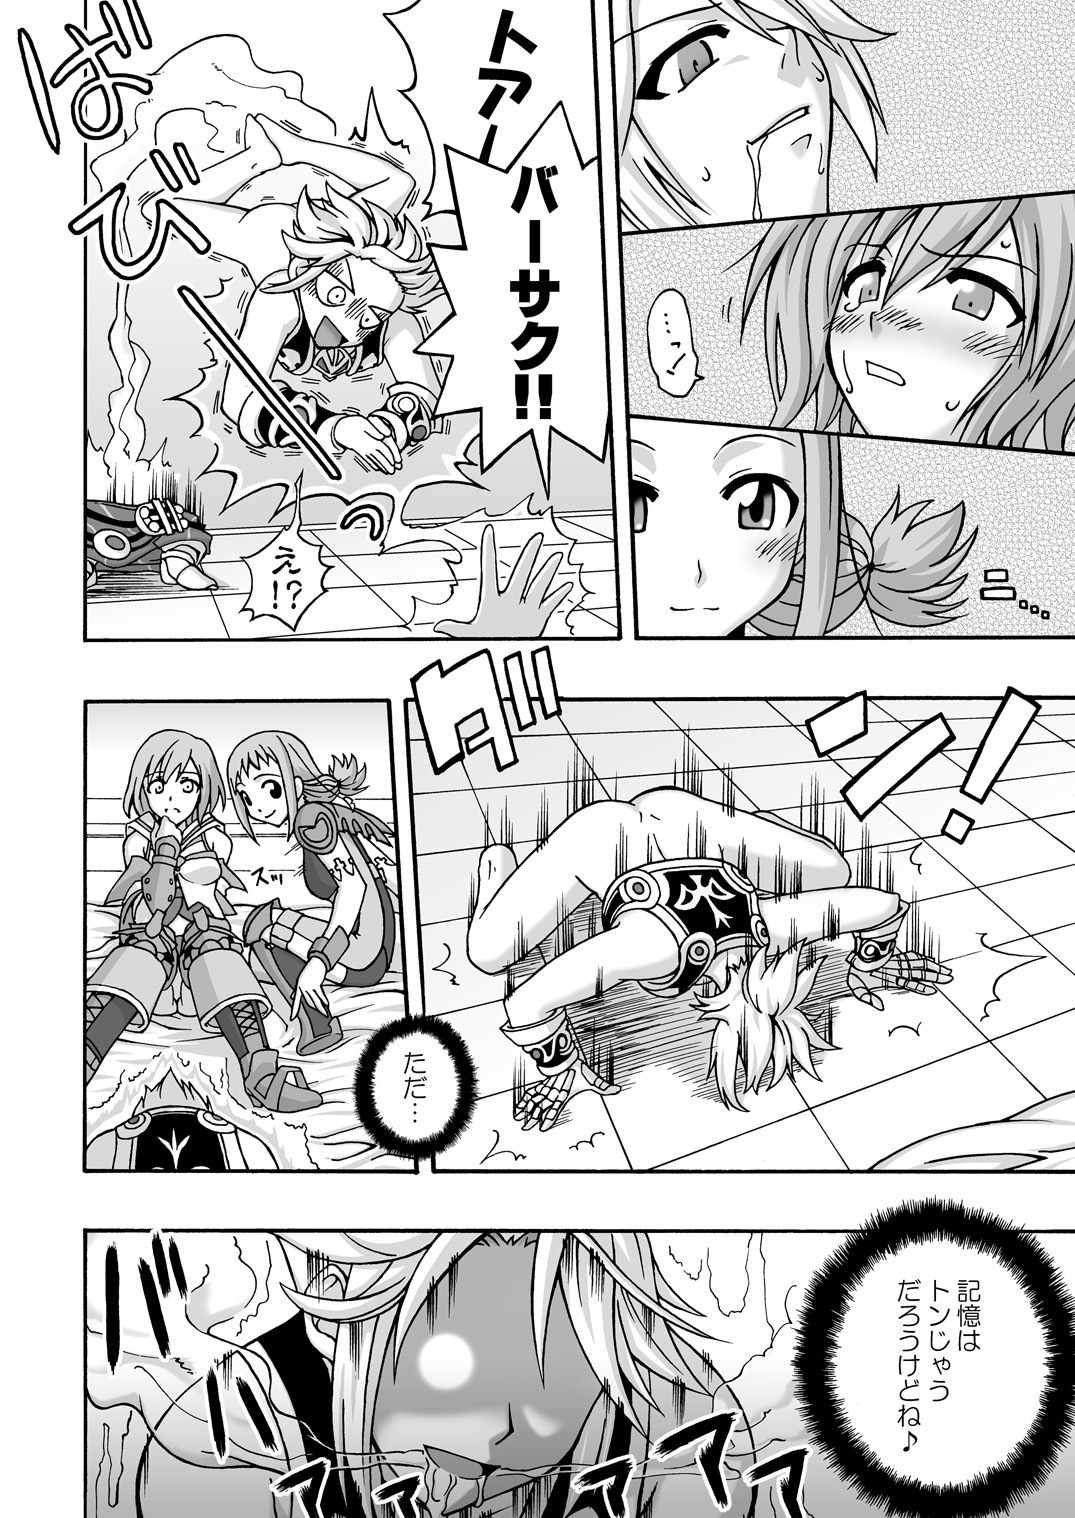 (C70) [FruitsJam (Mikagami Sou)] In the ROOM (Final Fantasy XII) page 17 full